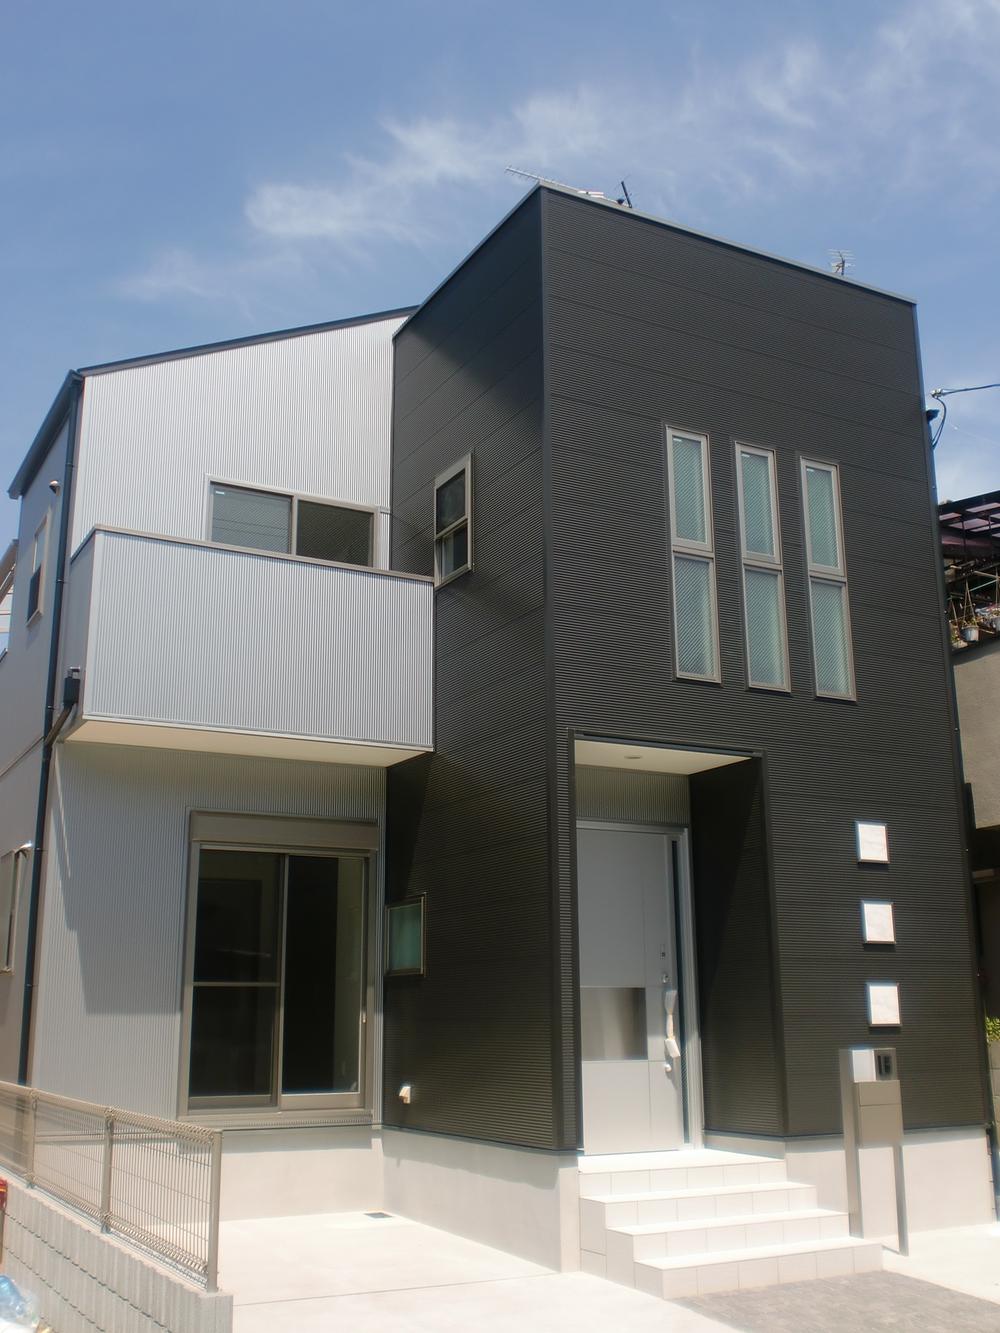 Other. Our example of construction (building exterior)